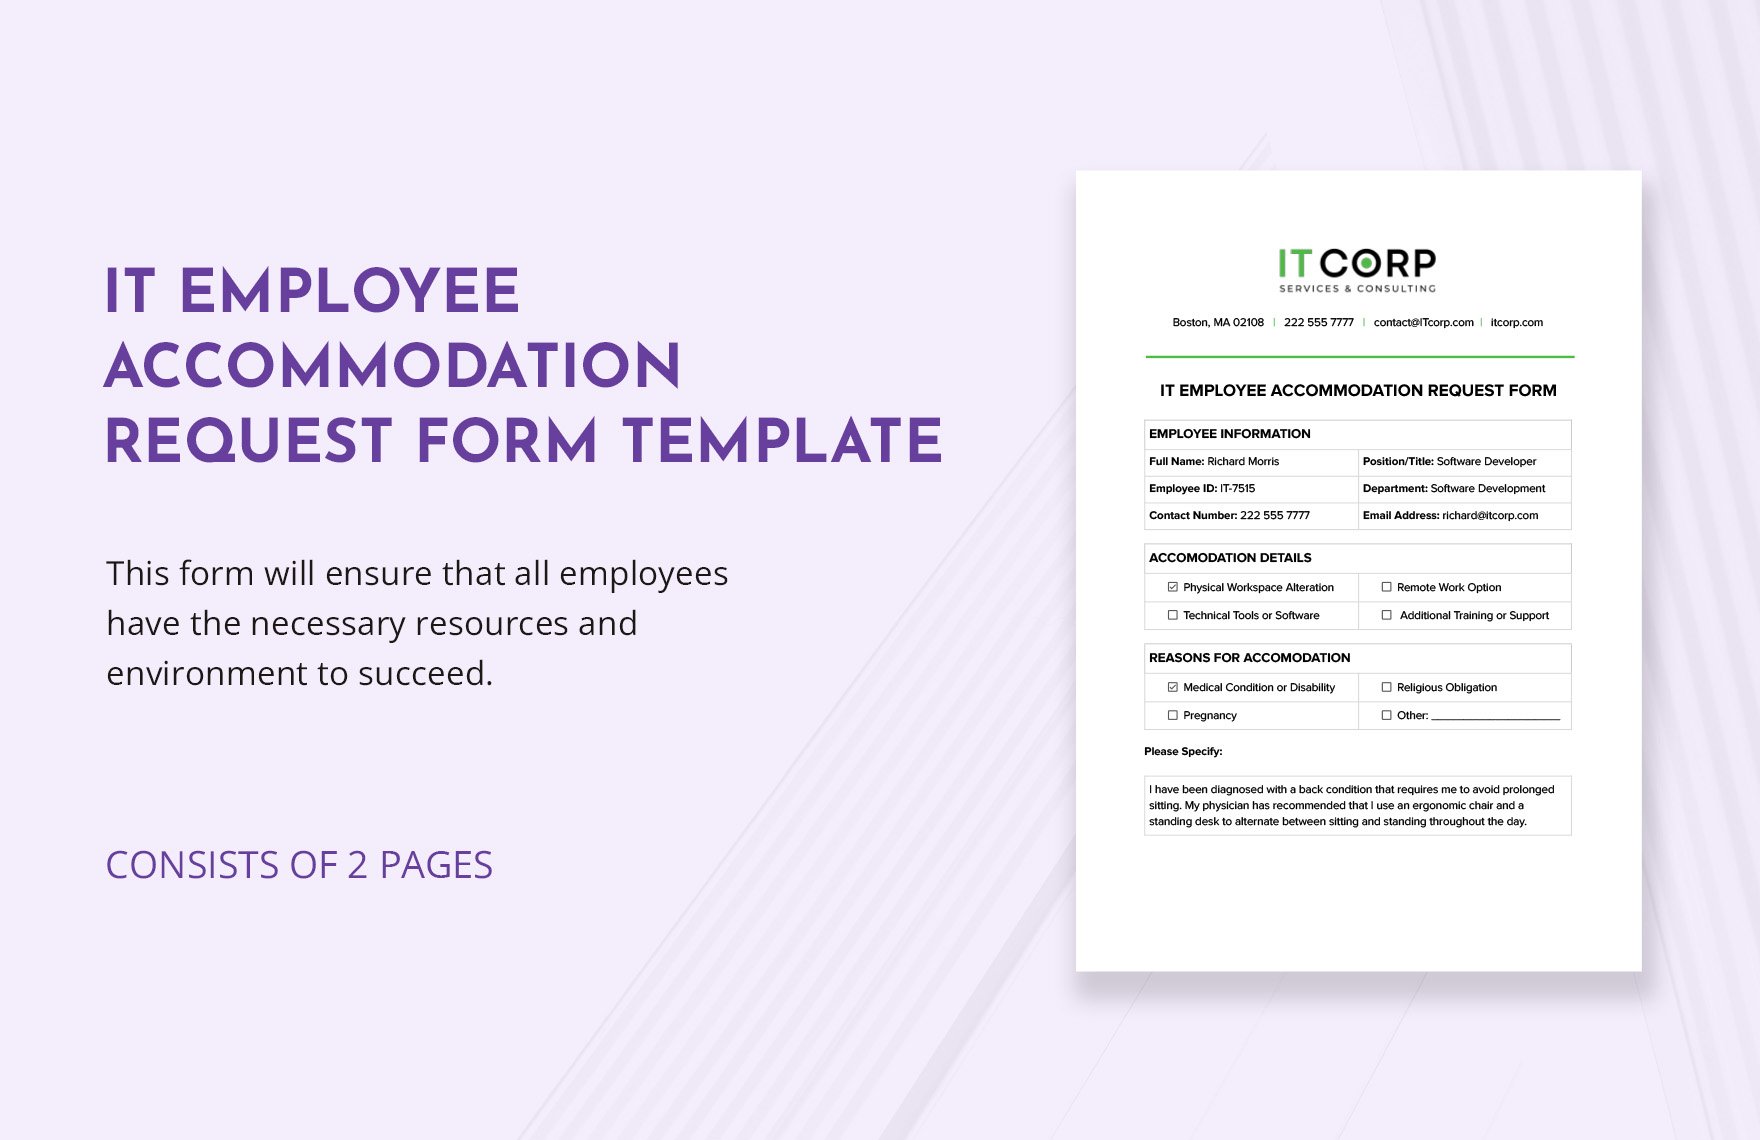 IT Employee Accommodation Request Form Template